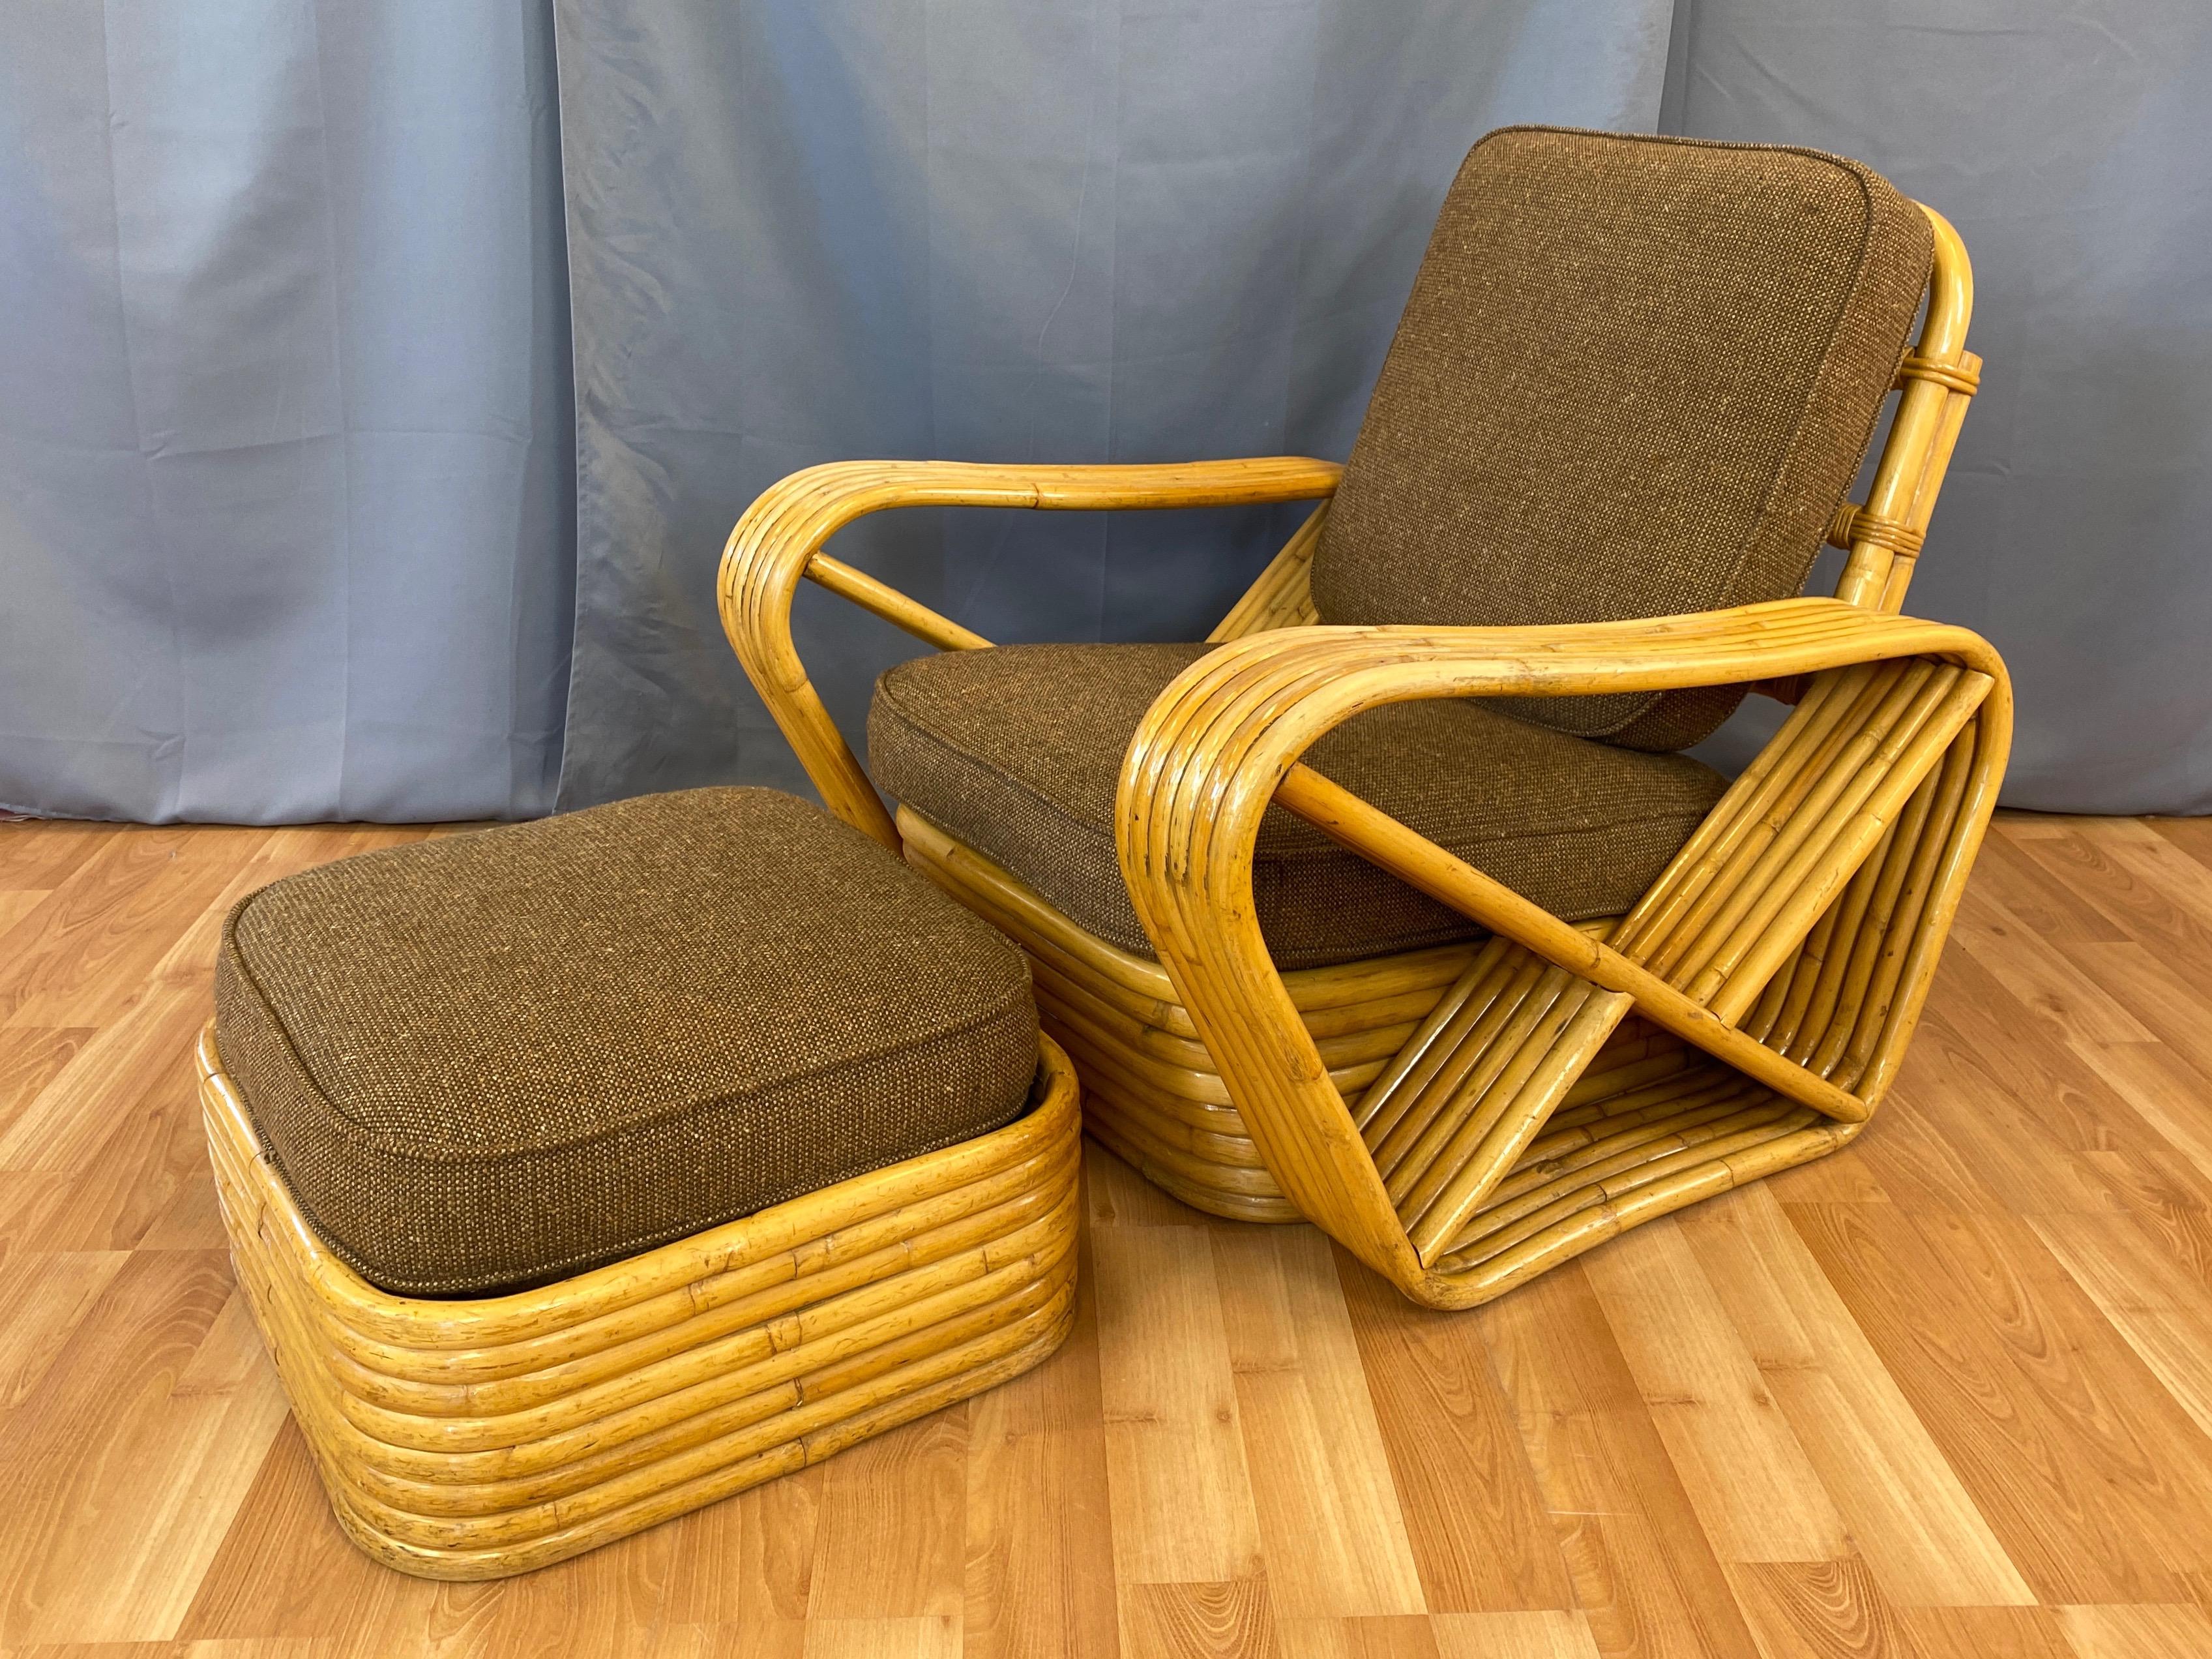 An impressive mid-century Paul Frankl-style rattan pretzel club or lounge chair & ottoman, with production attributed to Tropical Sun Co. of Pasadena, California.

Expertly-crafted bent rattan chair notable for six-strand arms with pretzel-style